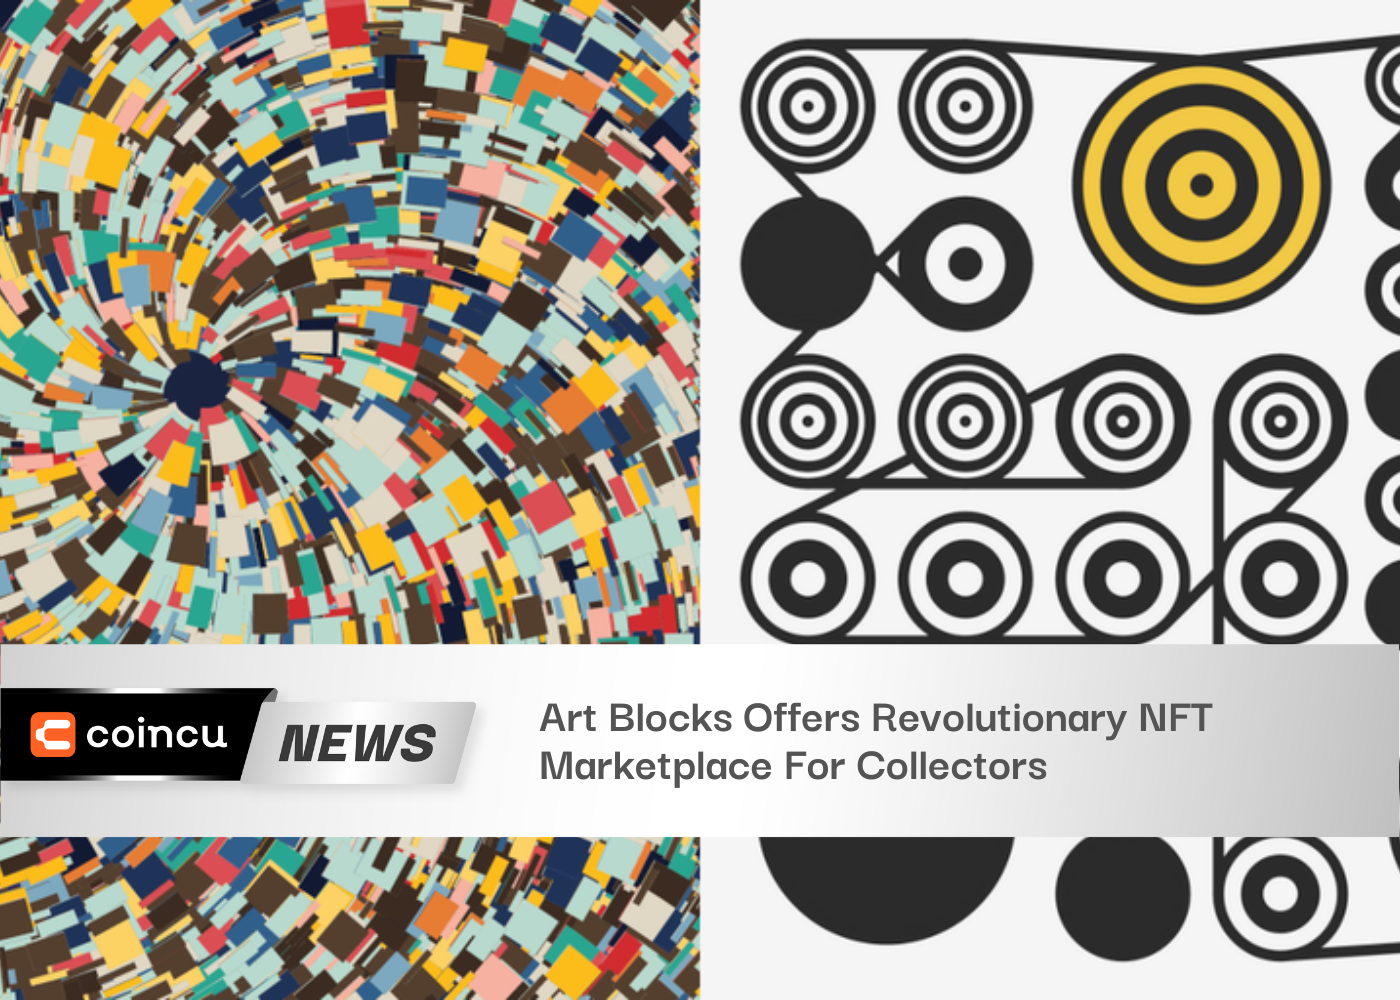 Art Blocks Offers Revolutionary NFT Marketplace For Collectors